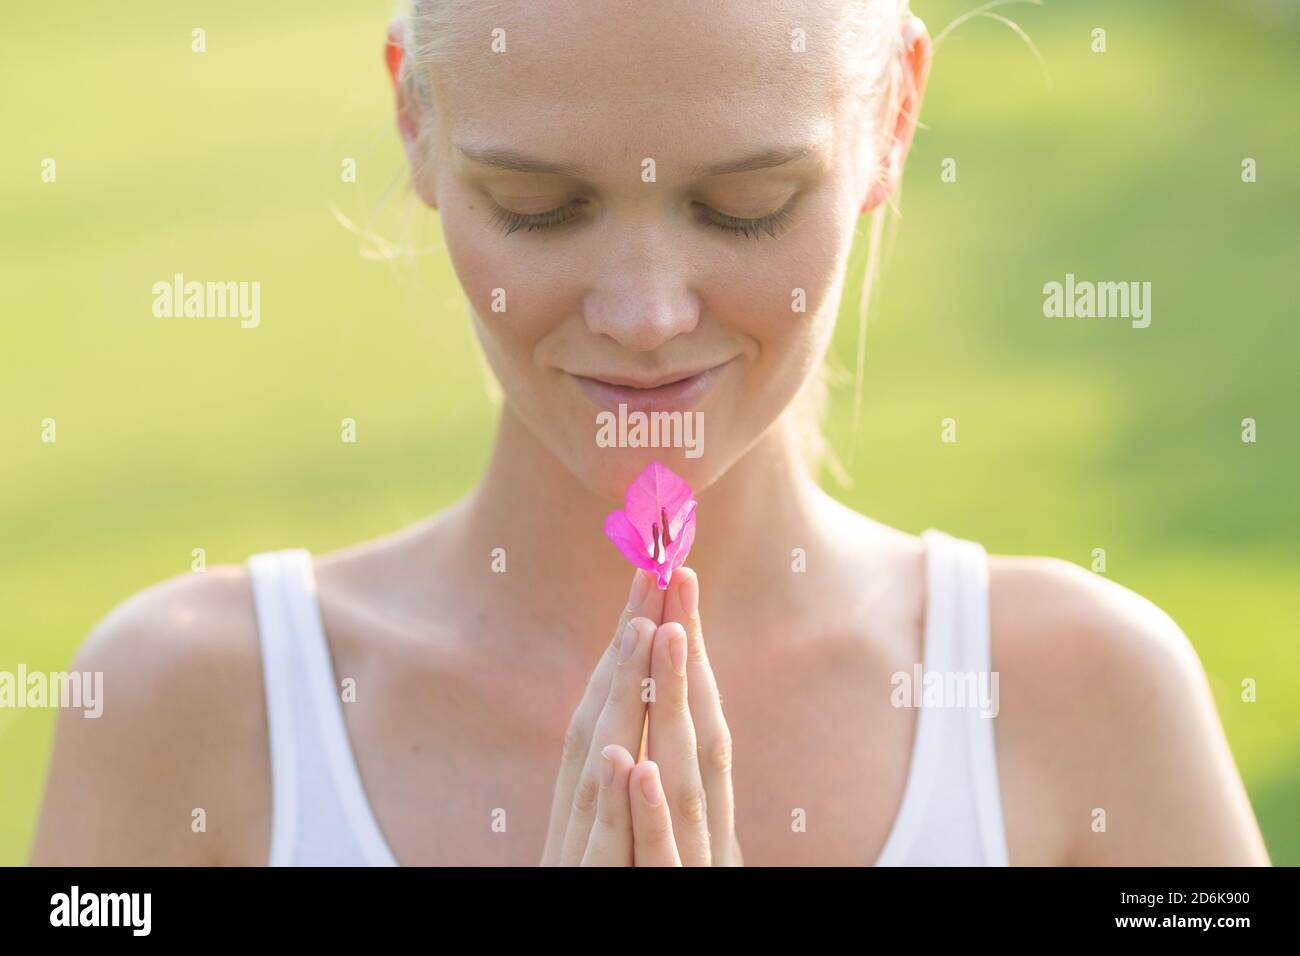 Wellness and relaxation. Calm young woman holding a pink flower in her hands against a green background. Stock Photo